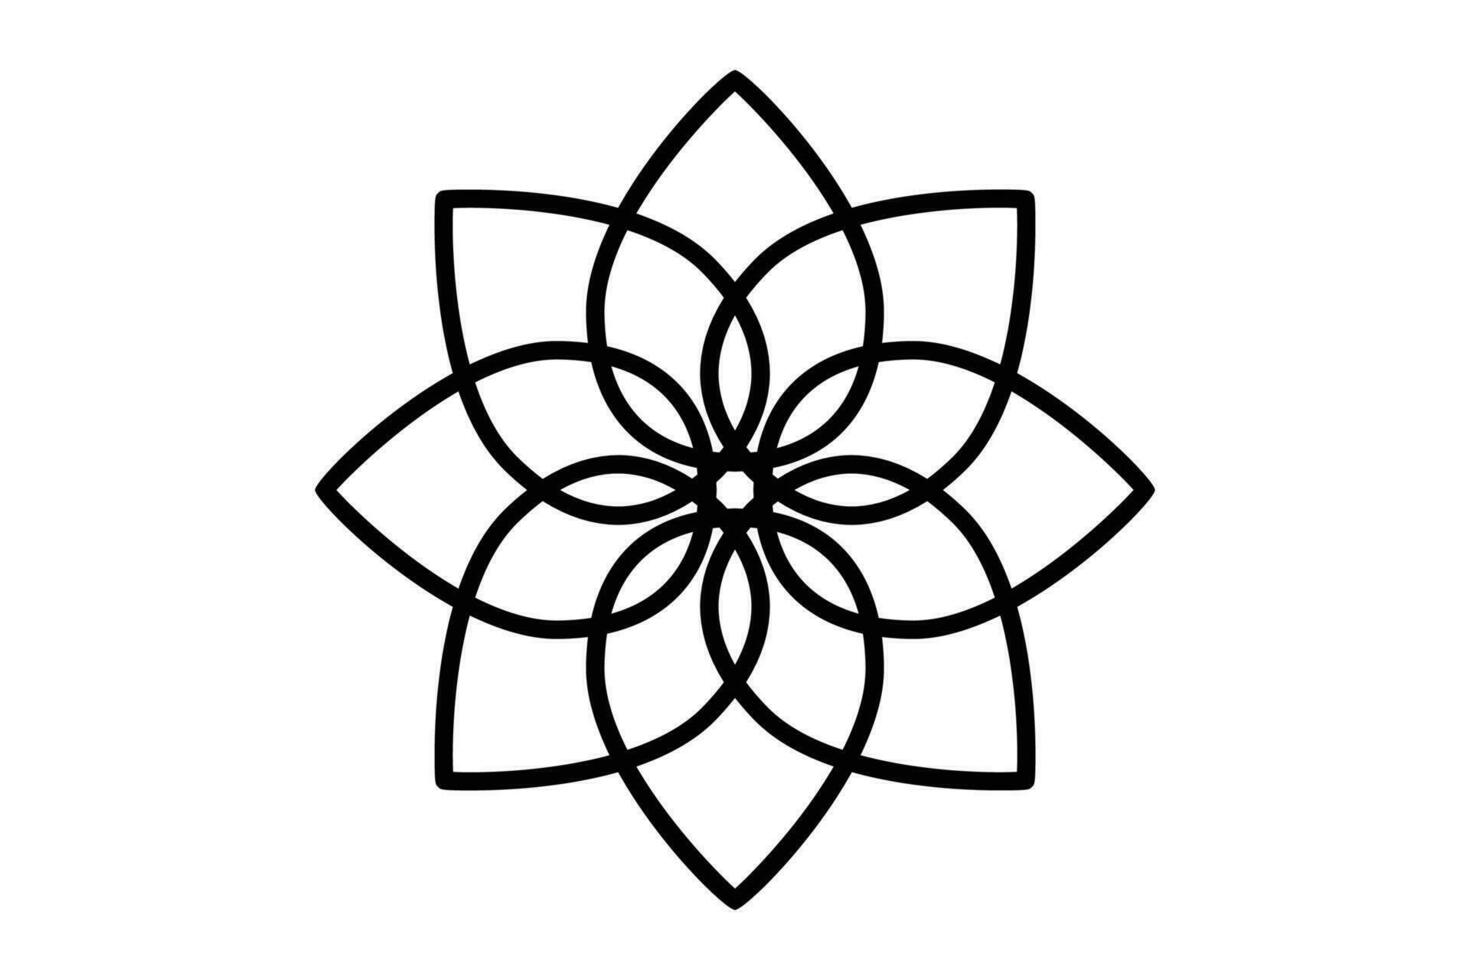 Lotus flower icon. icon related to purity and beauty in spa treatments. line icon style. element illustration vector